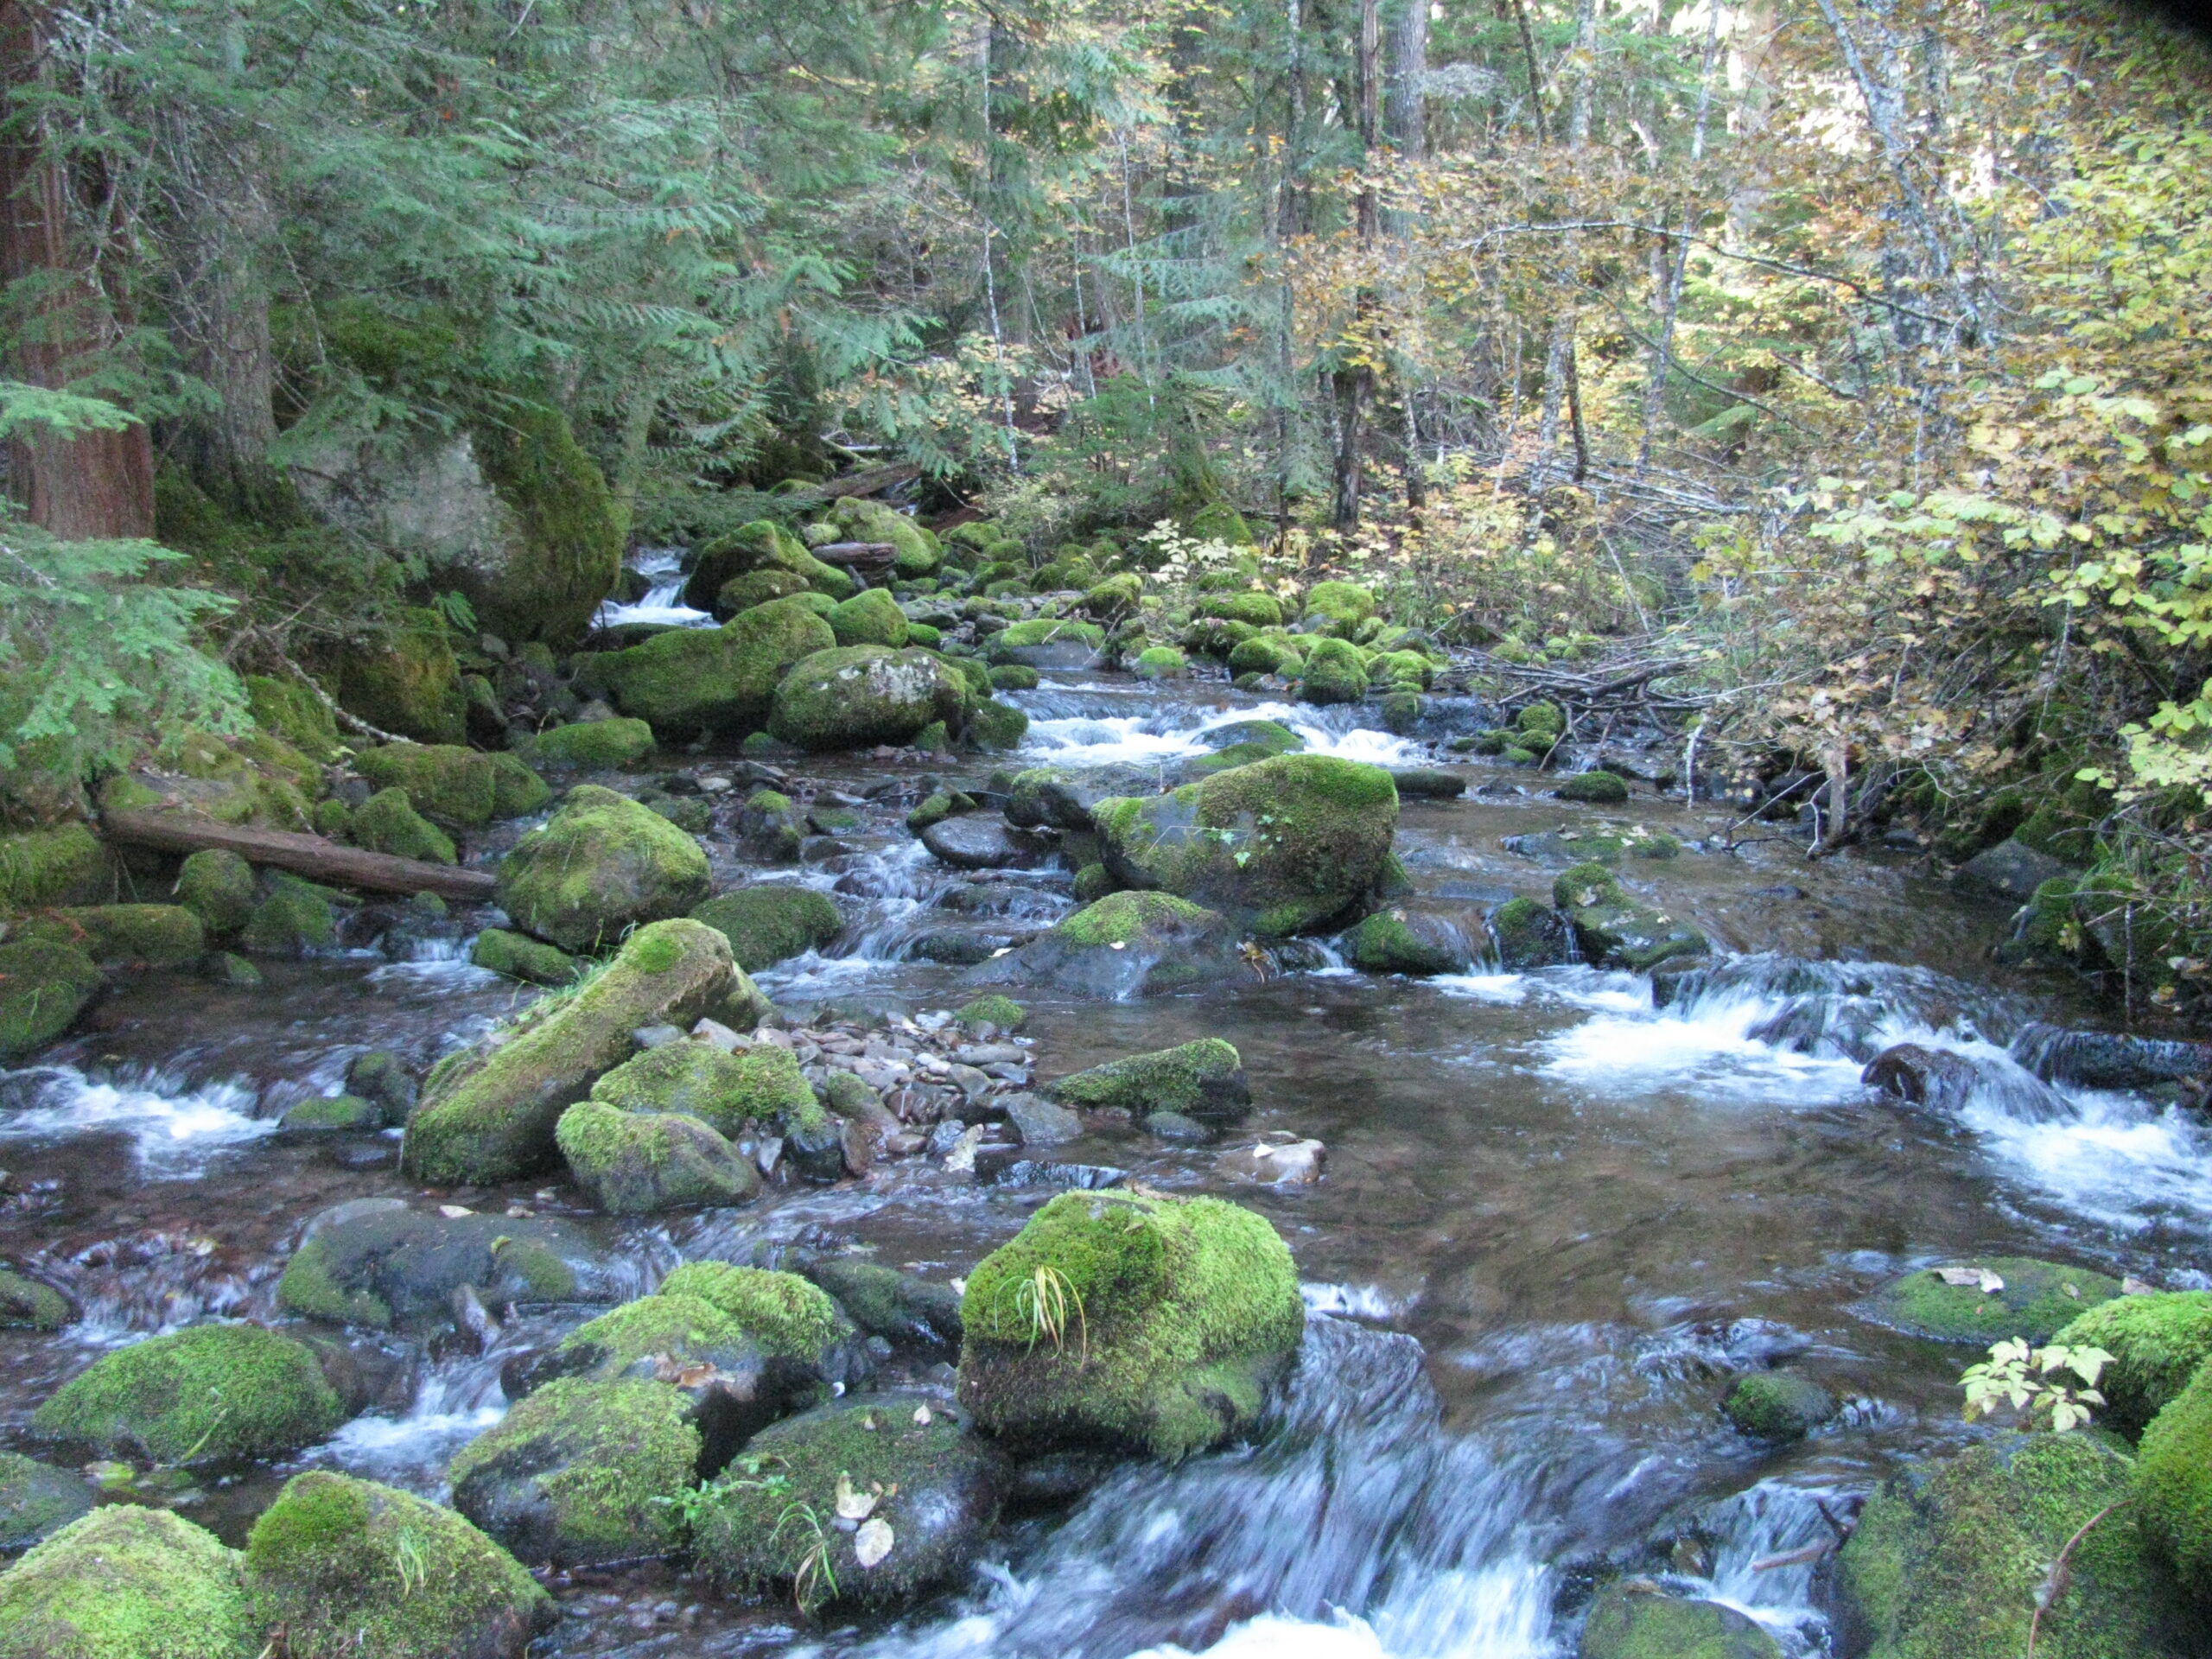 This is a cobble streambed creek, with algae growth on the rocks. The photo is facing upstream with afternoon light in the trees.